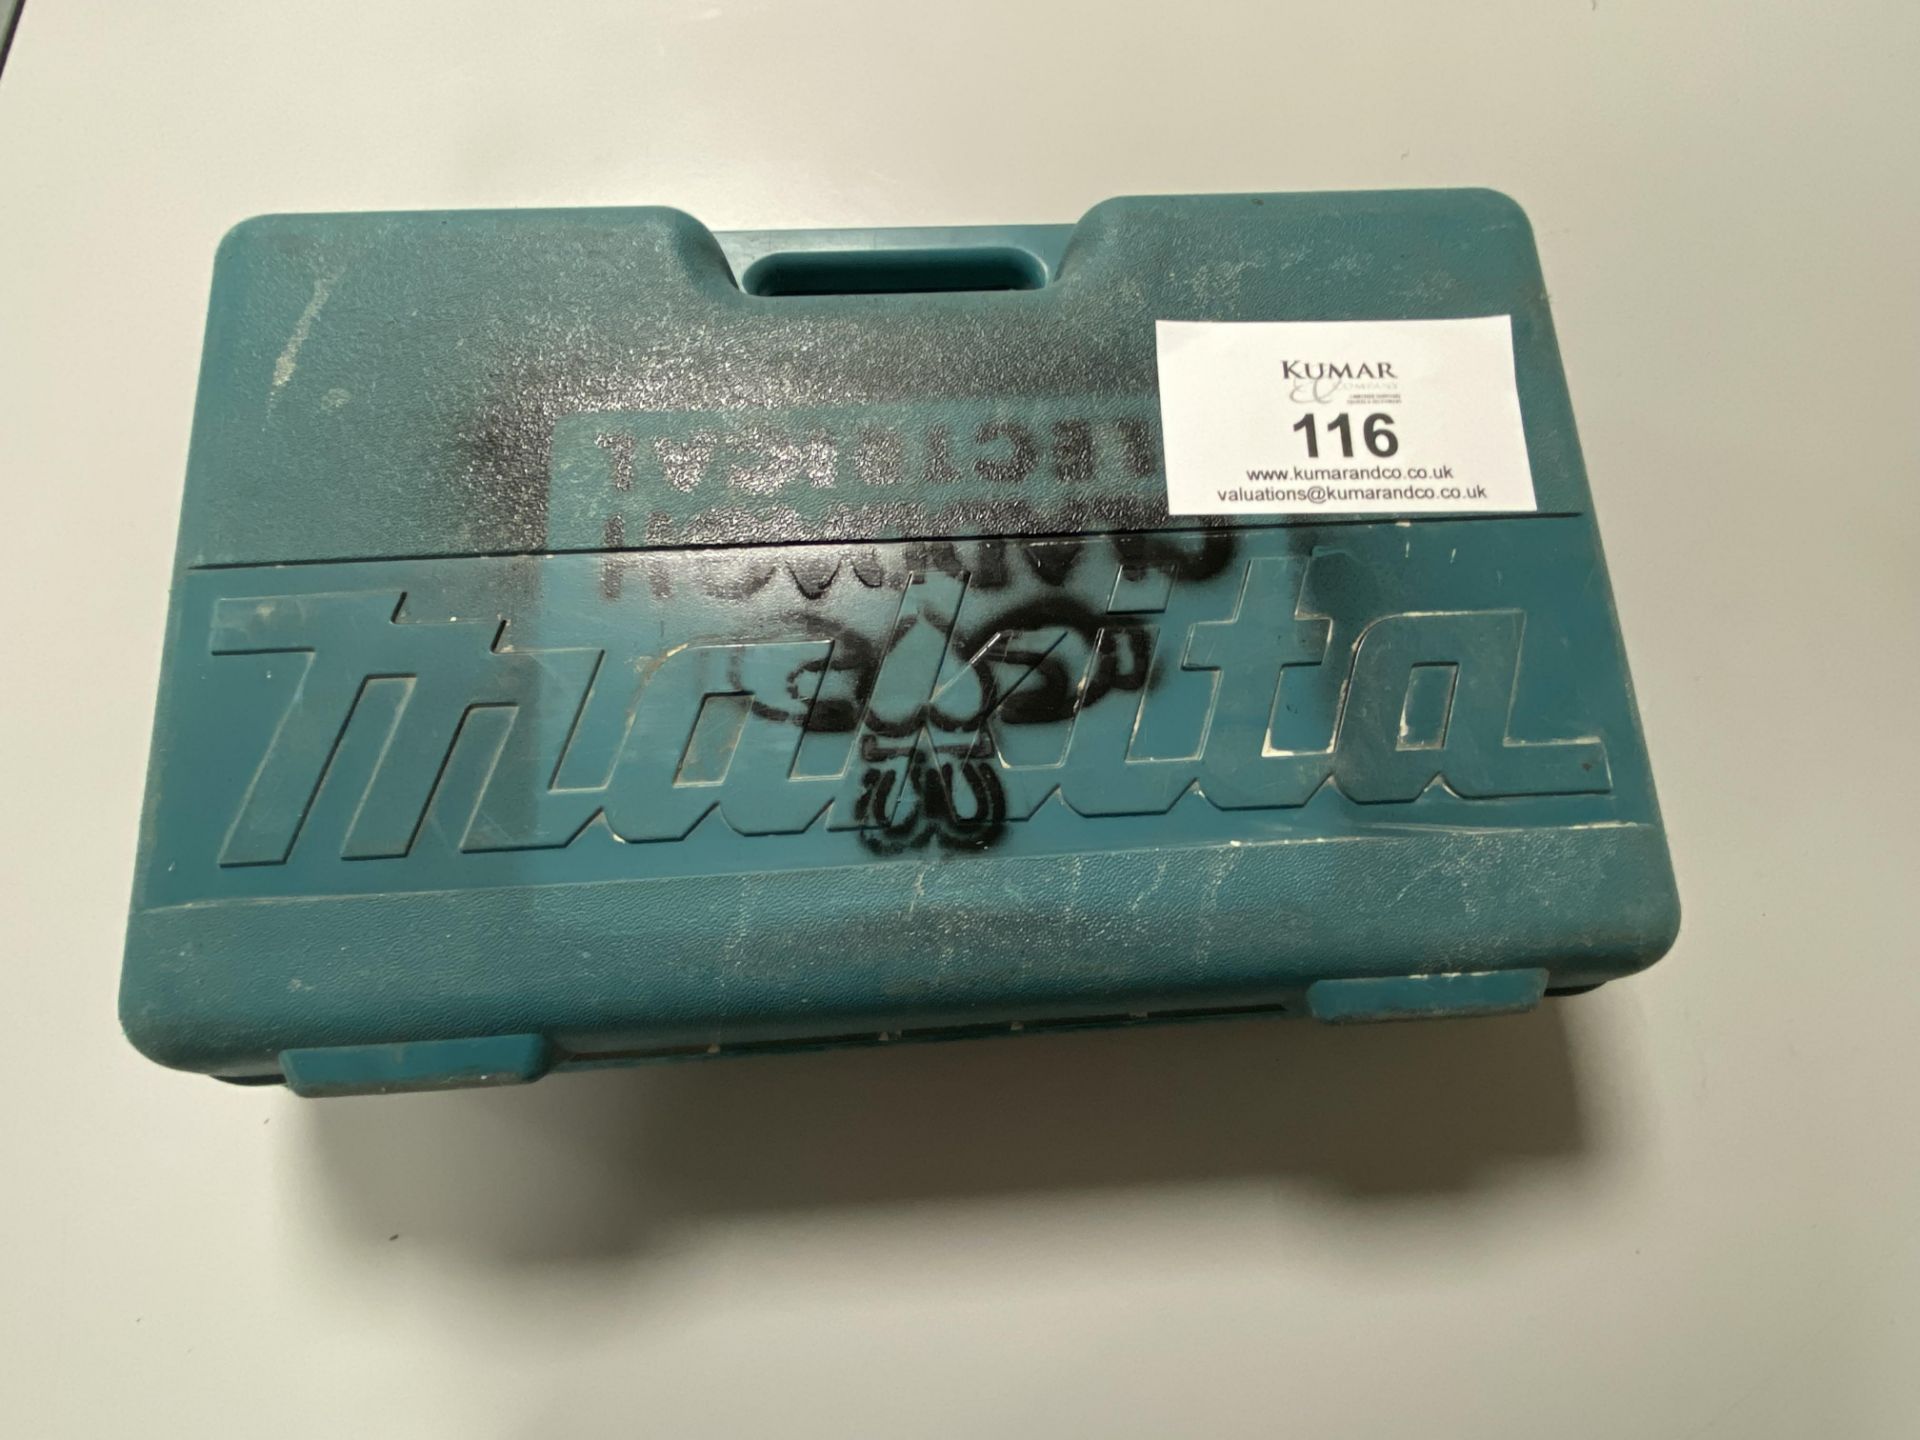 Makita HR2400 110v Rotary Hammer Drill with Carry Case and Various Accessories and Drillbits as - Image 5 of 5